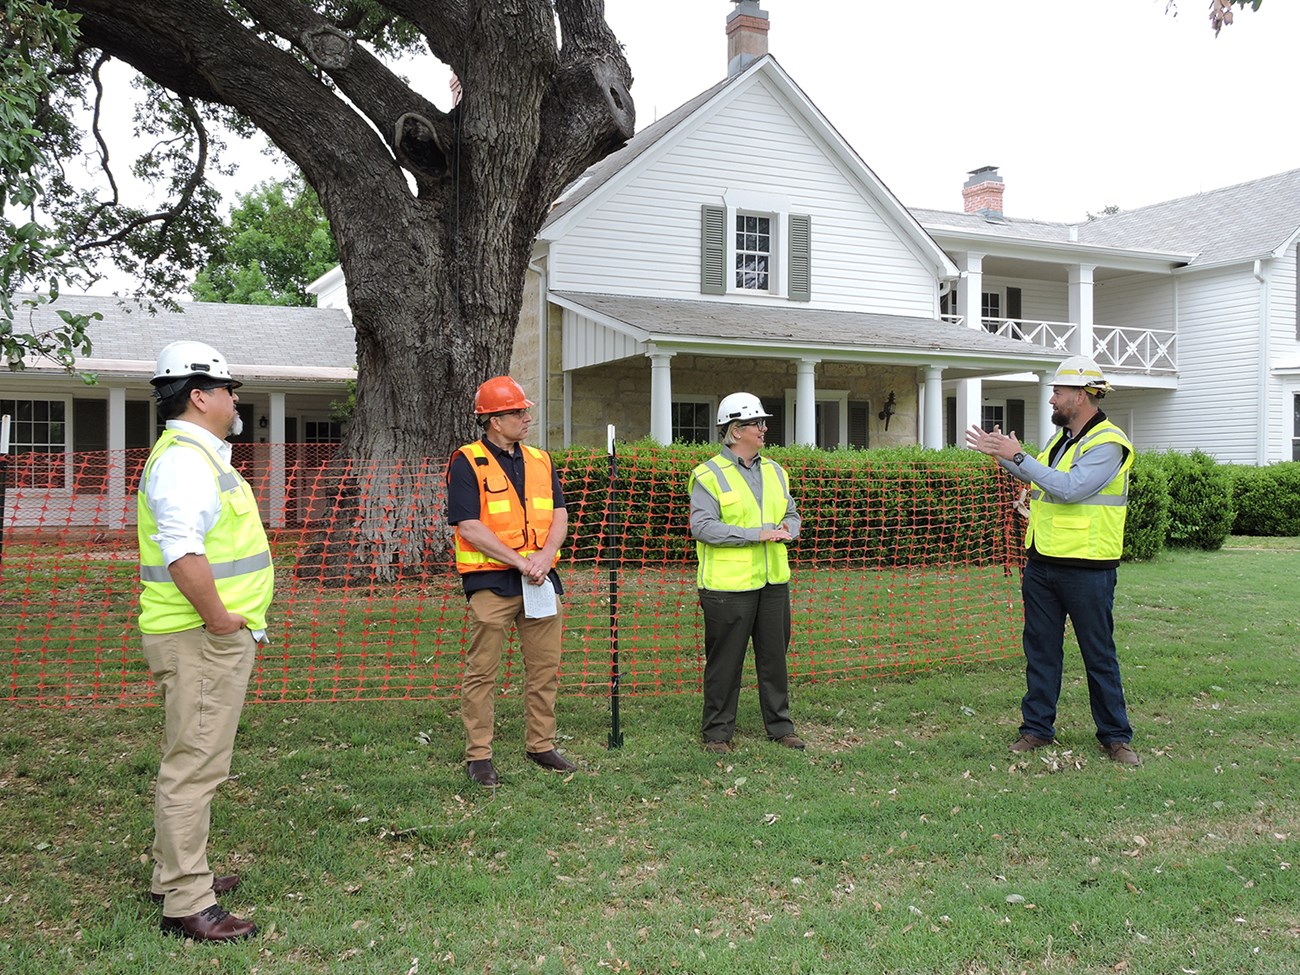 People in construction vests stand in front of a white house surrounded by orange fencing